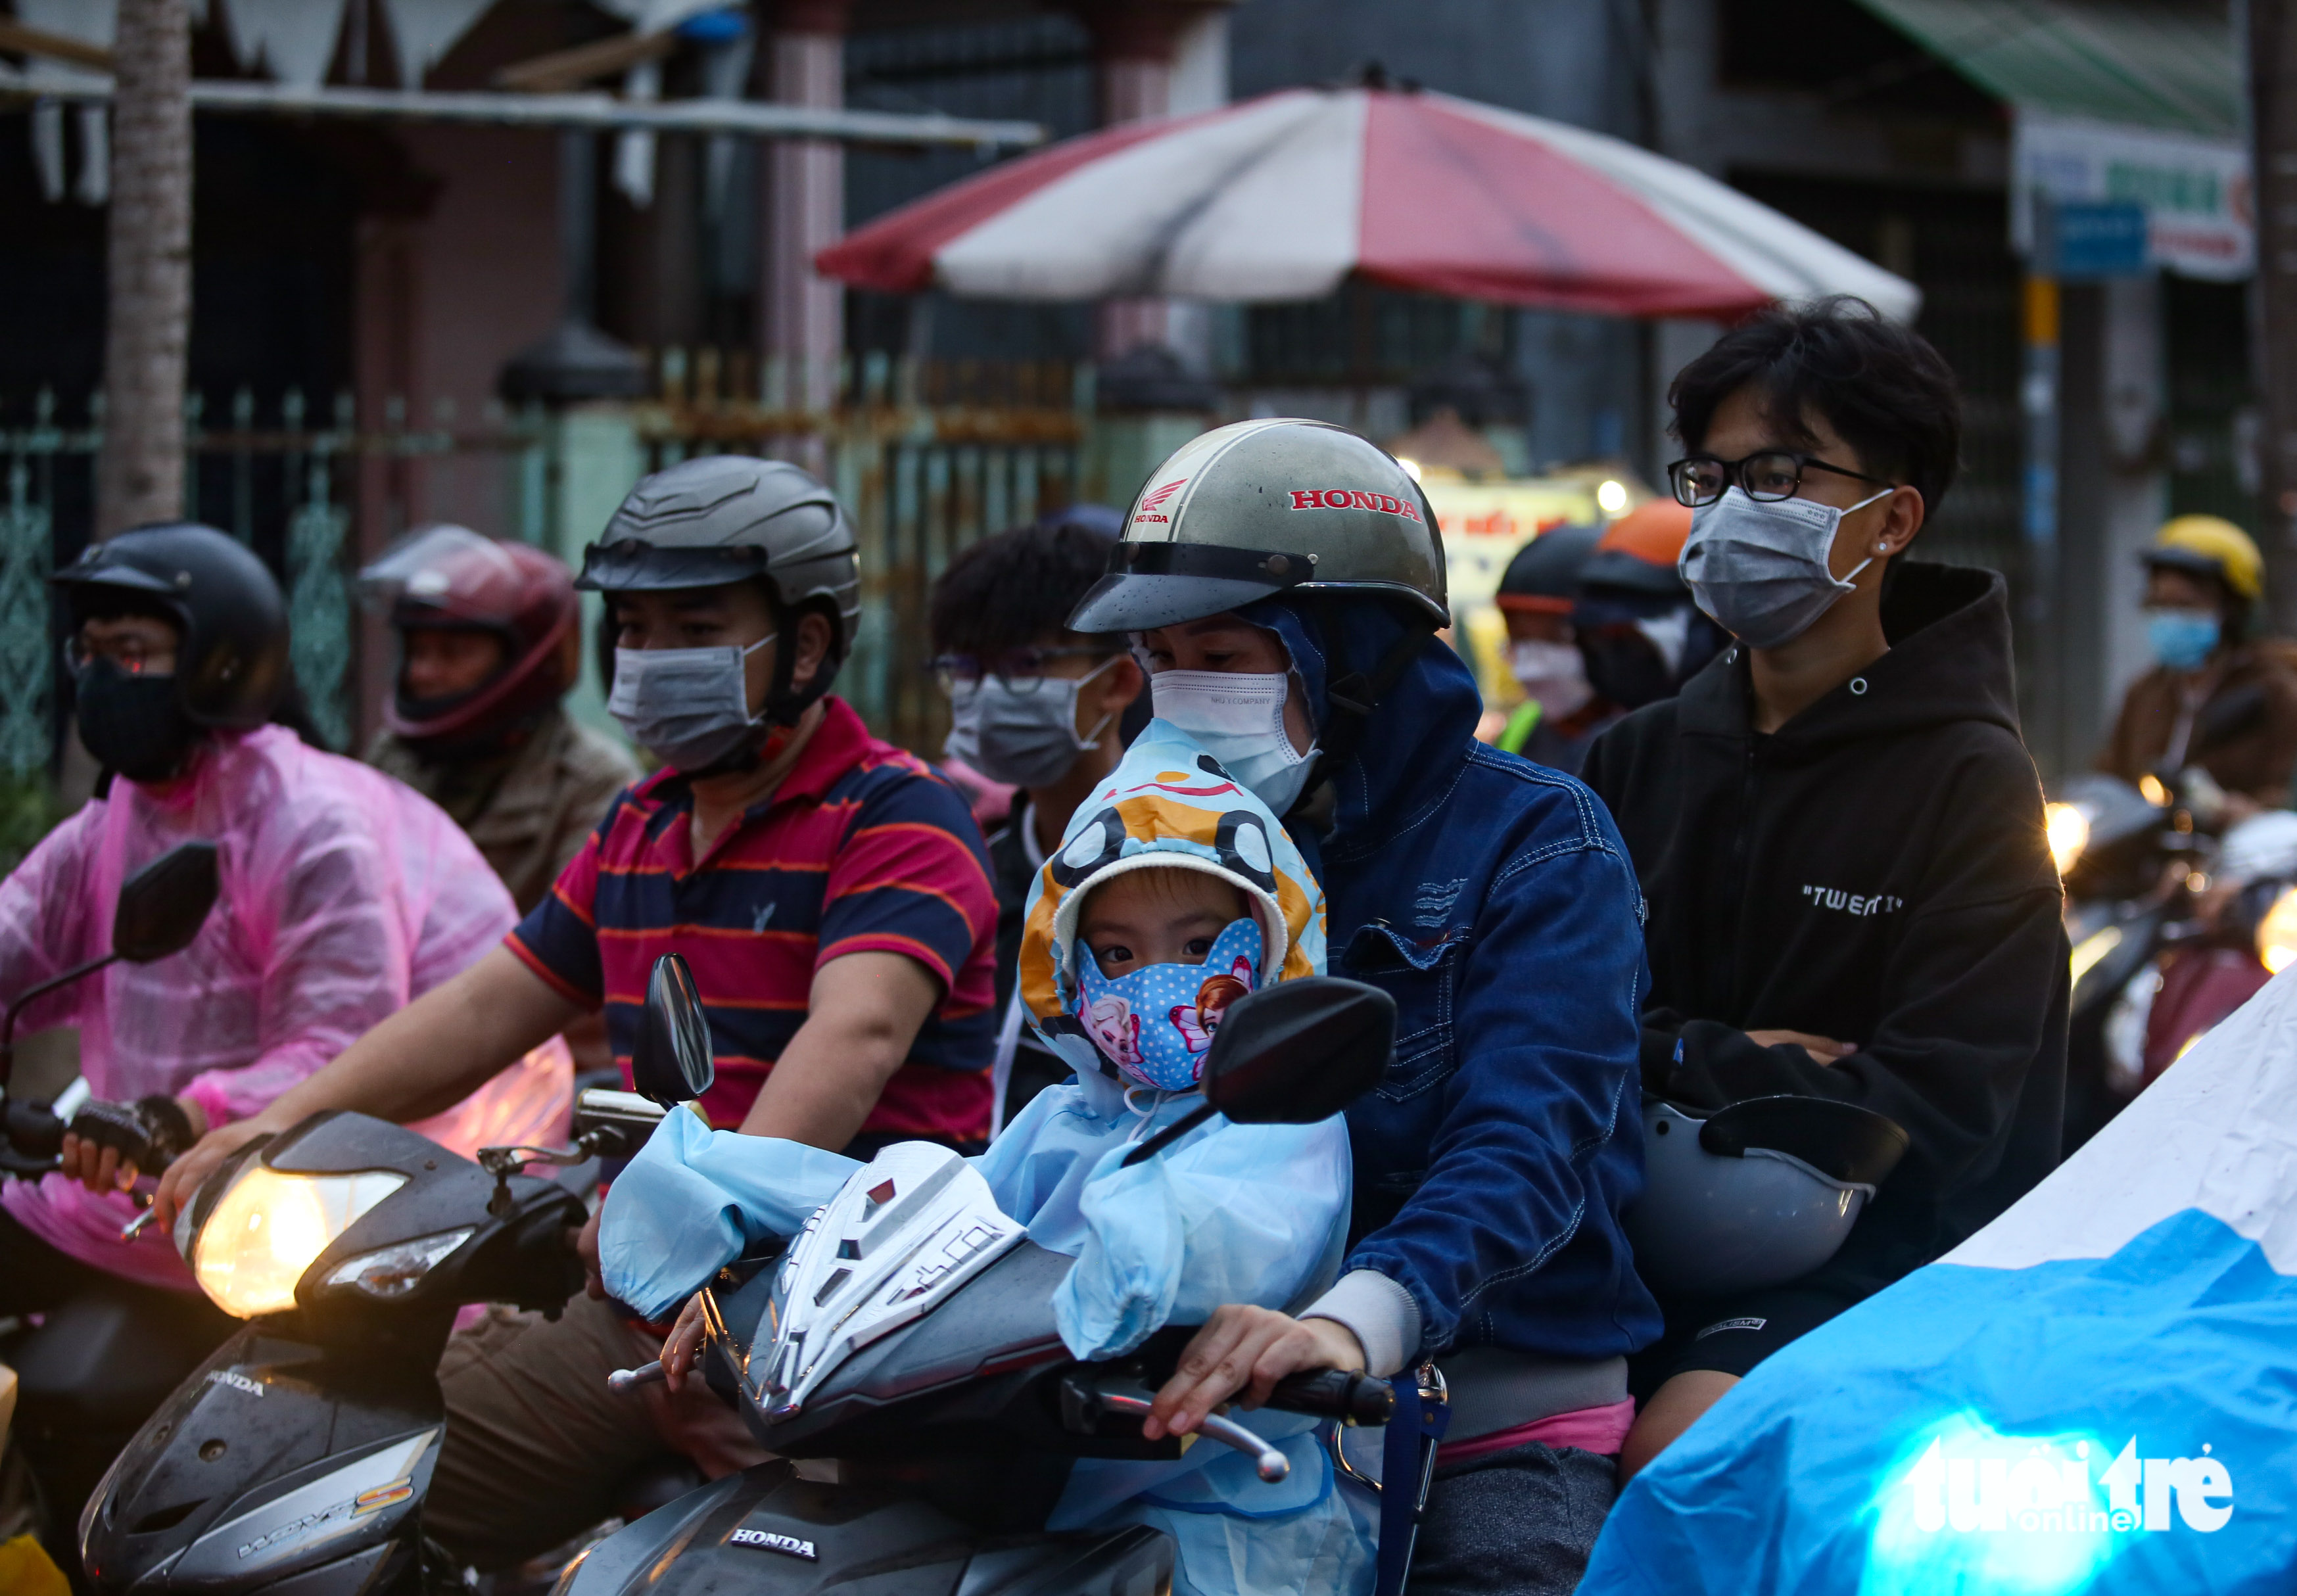 Motorcyclists battle rain and congestion on Ly Thai To Street, which leads to the Cat Lai Ferry, in Dong Nai Province, Vietnam, January 2, 2023. Photo: Chau Tuan / Tuoi Tre